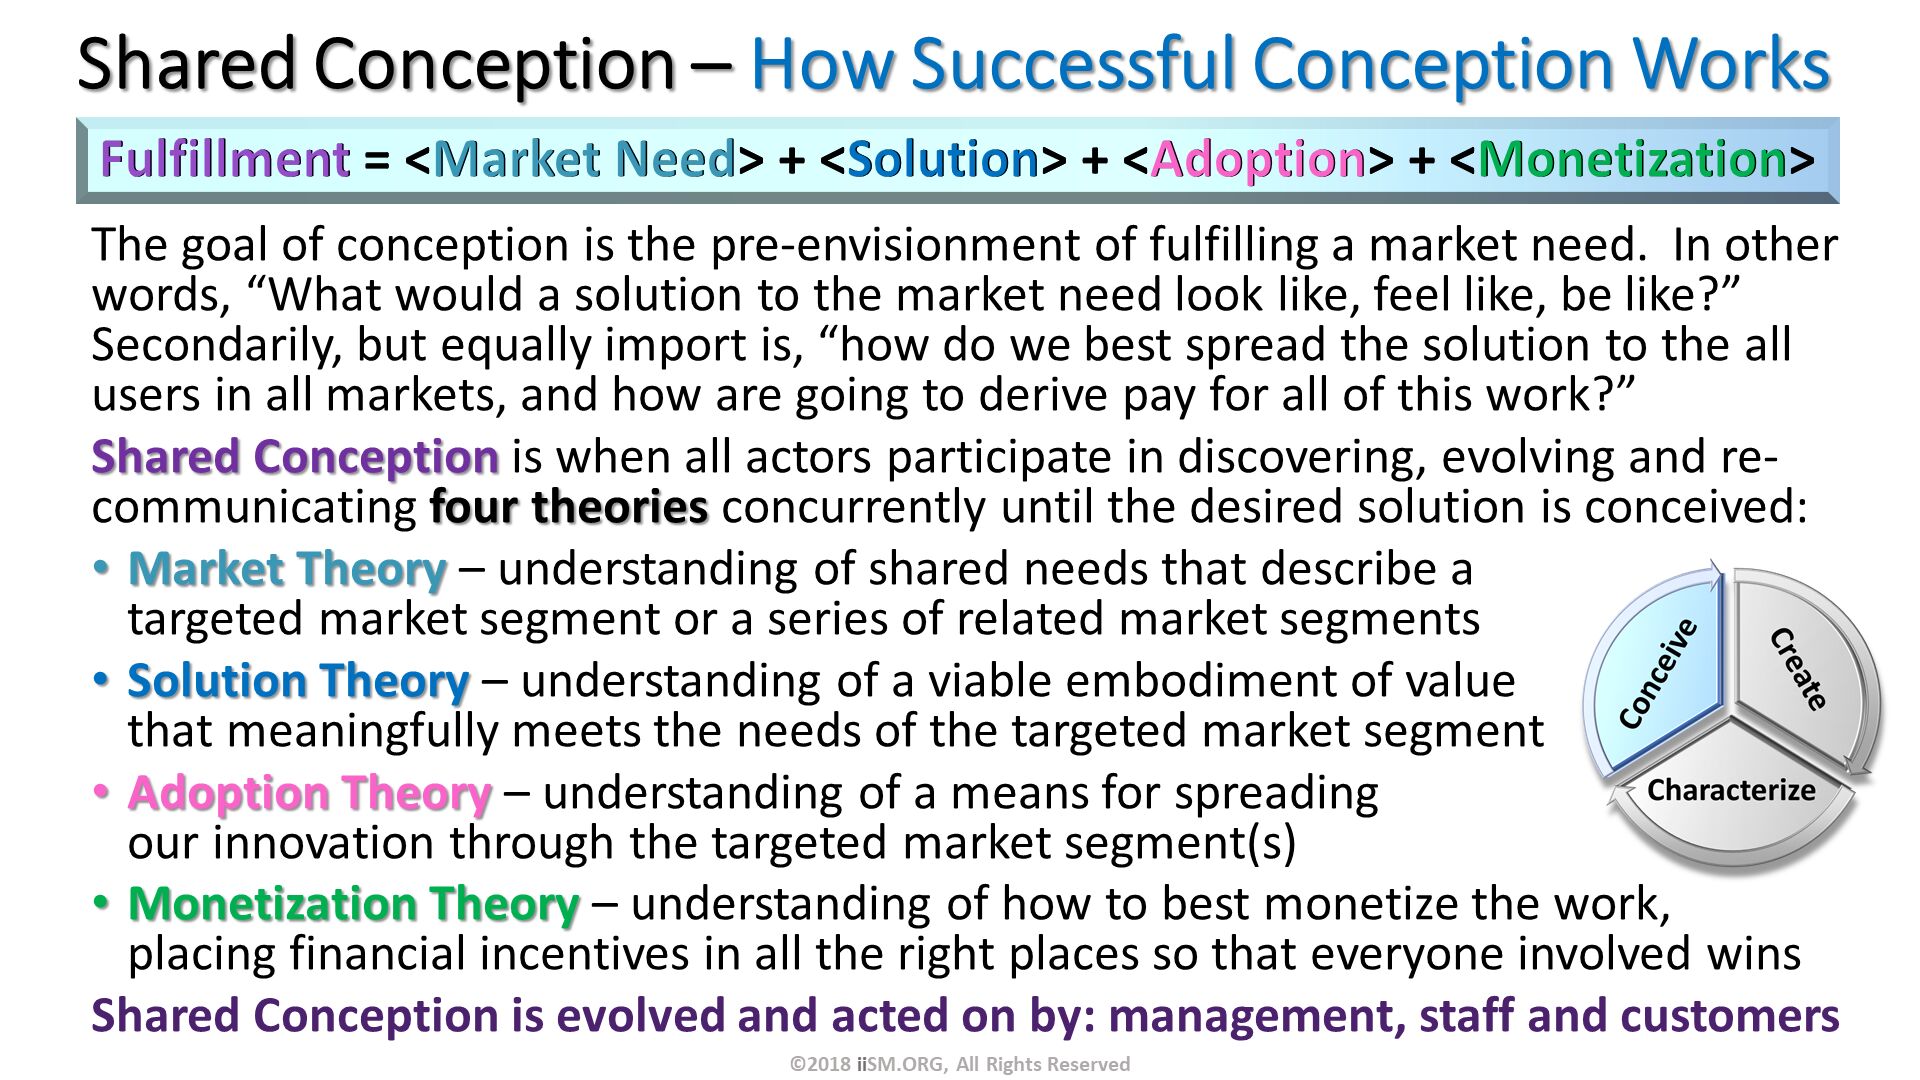 Shared Conception – How Successful Conception Works. Fulfillment = <Market Need> + <Solution> + <Adoption> + <Monetization>. The goal of conception is the pre-envisionment of fulfilling a market need.  In other words, “What would a solution to the market need look like, feel like, be like?”  Secondarily, but equally import is, “how do we best spread the solution to the all users in all markets, and how are going to derive pay for all of this work?”
Shared Conception is when all actors participate in discovering, evolving and re-communicating four theories concurrently until the desired solution is conceived:
Market Theory – understanding of shared needs that describe a targeted market segment or a series of related market segments
Solution Theory – understanding of a viable embodiment of value that meaningfully meets the needs of the targeted market segment
Adoption Theory – understanding of a means for spreadingour innovation through the targeted market segment(s)
Monetization Theory – understanding of how to best monetize the work,placing financial incentives in all the right places so that everyone involved wins
Shared Conception is evolved and acted on by: management, staff and customers
. ©2018 iiSM.ORG, All Rights Reserved. 